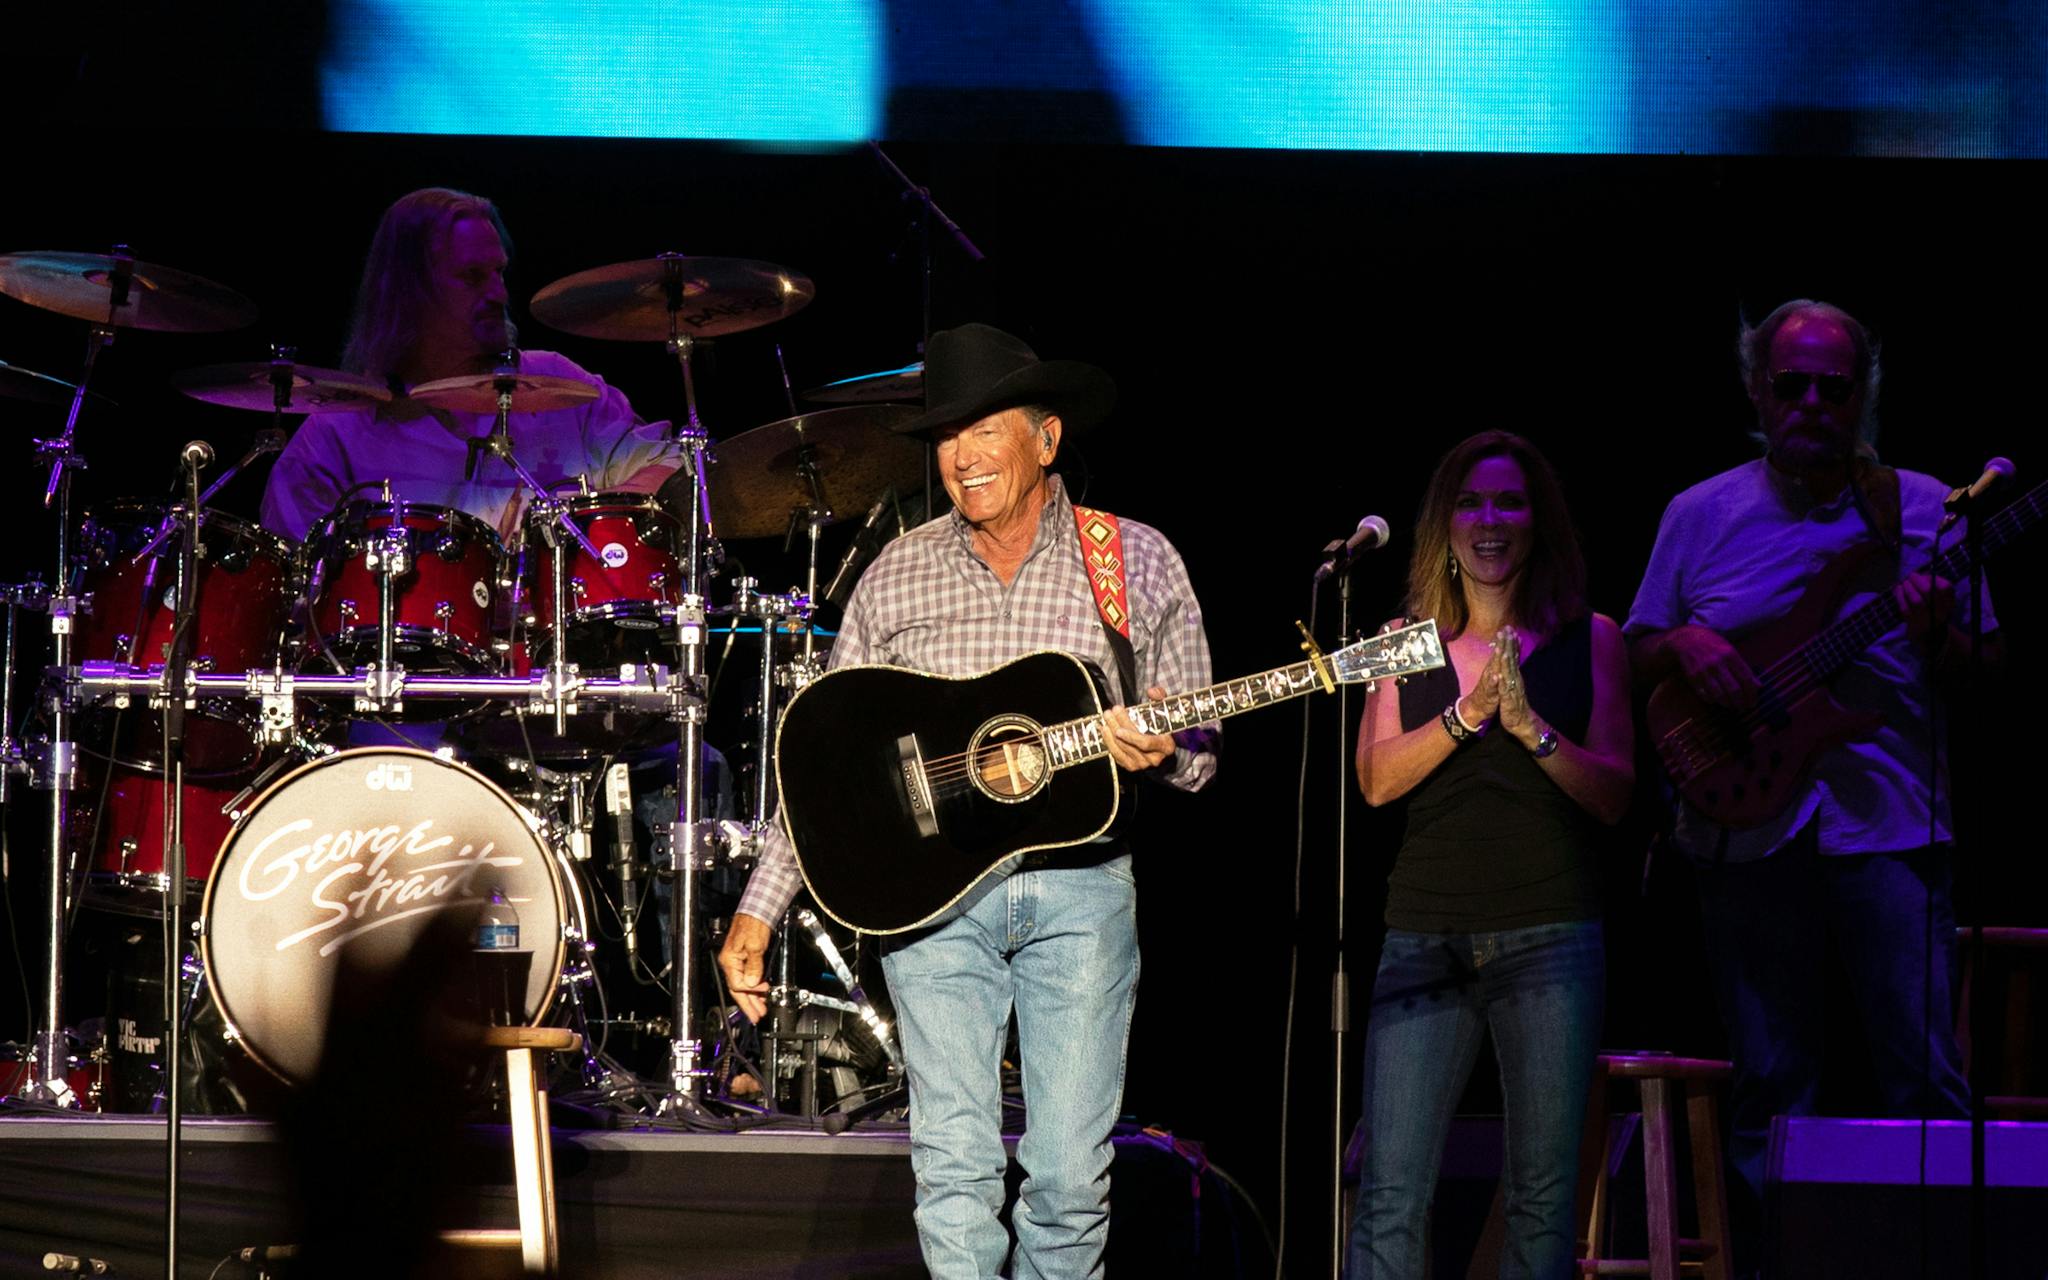 George Strait at ACL 2021.